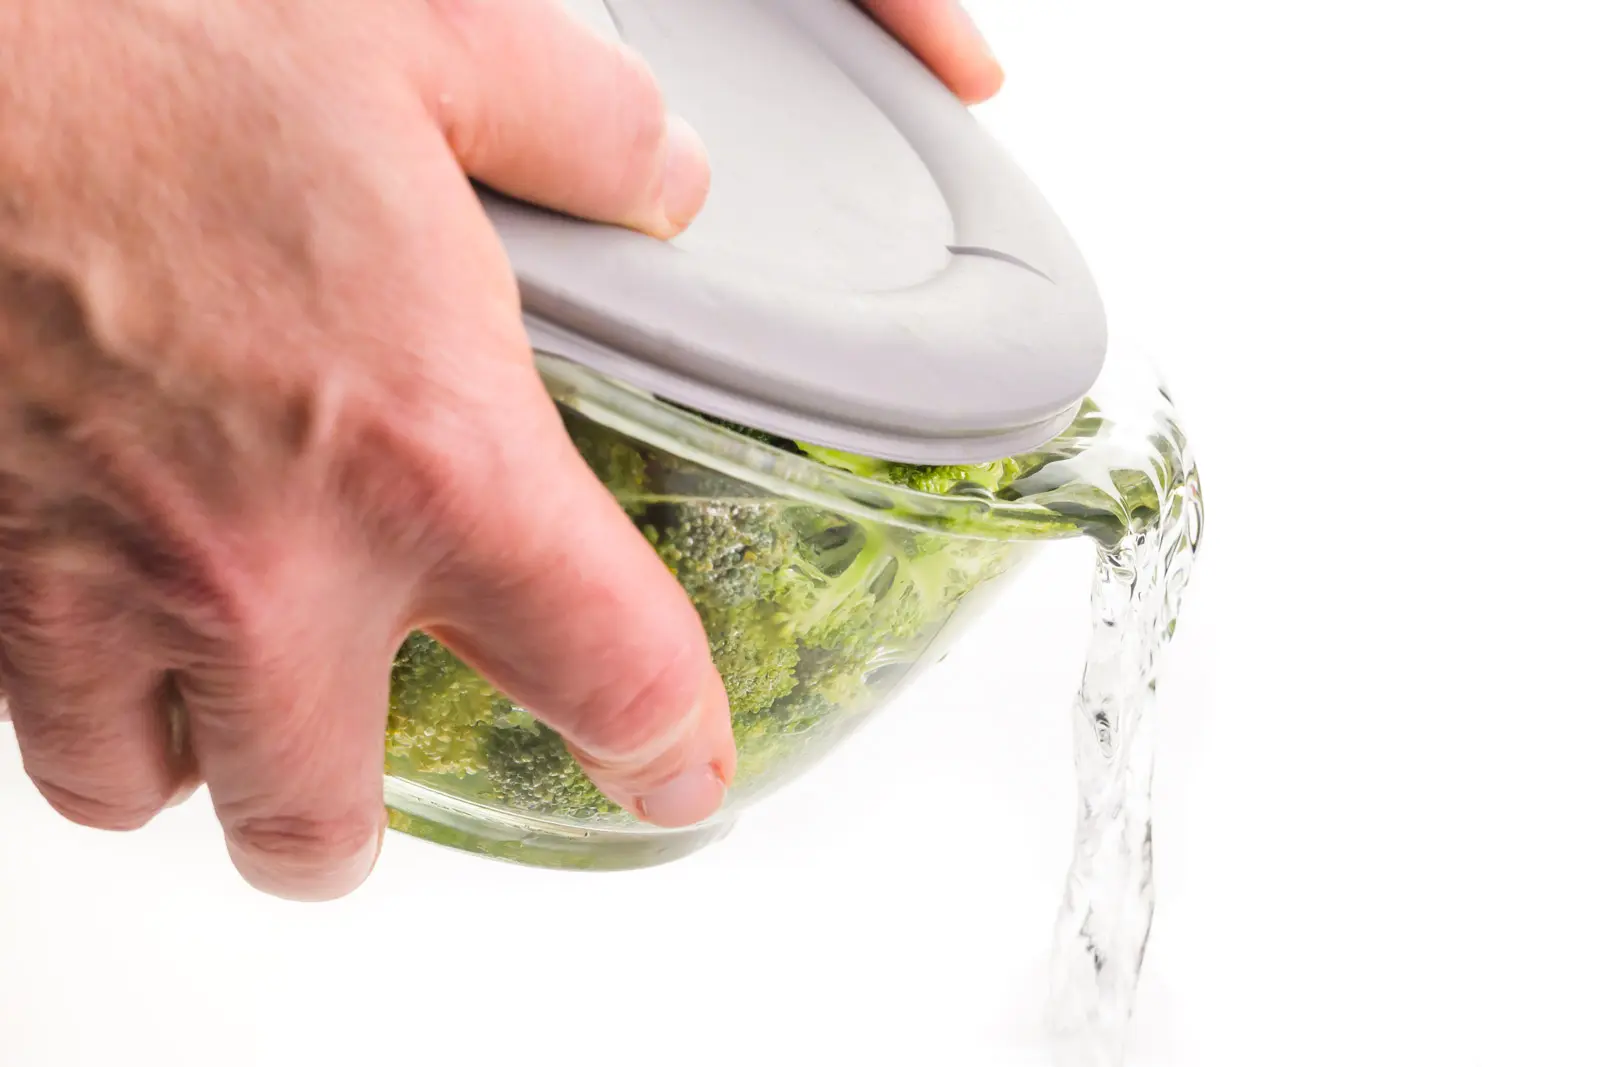 Two hands hold a lidded bowl full of broccoli florets and water. The lid is slightly ajar and the water is being poured out of the bowl.